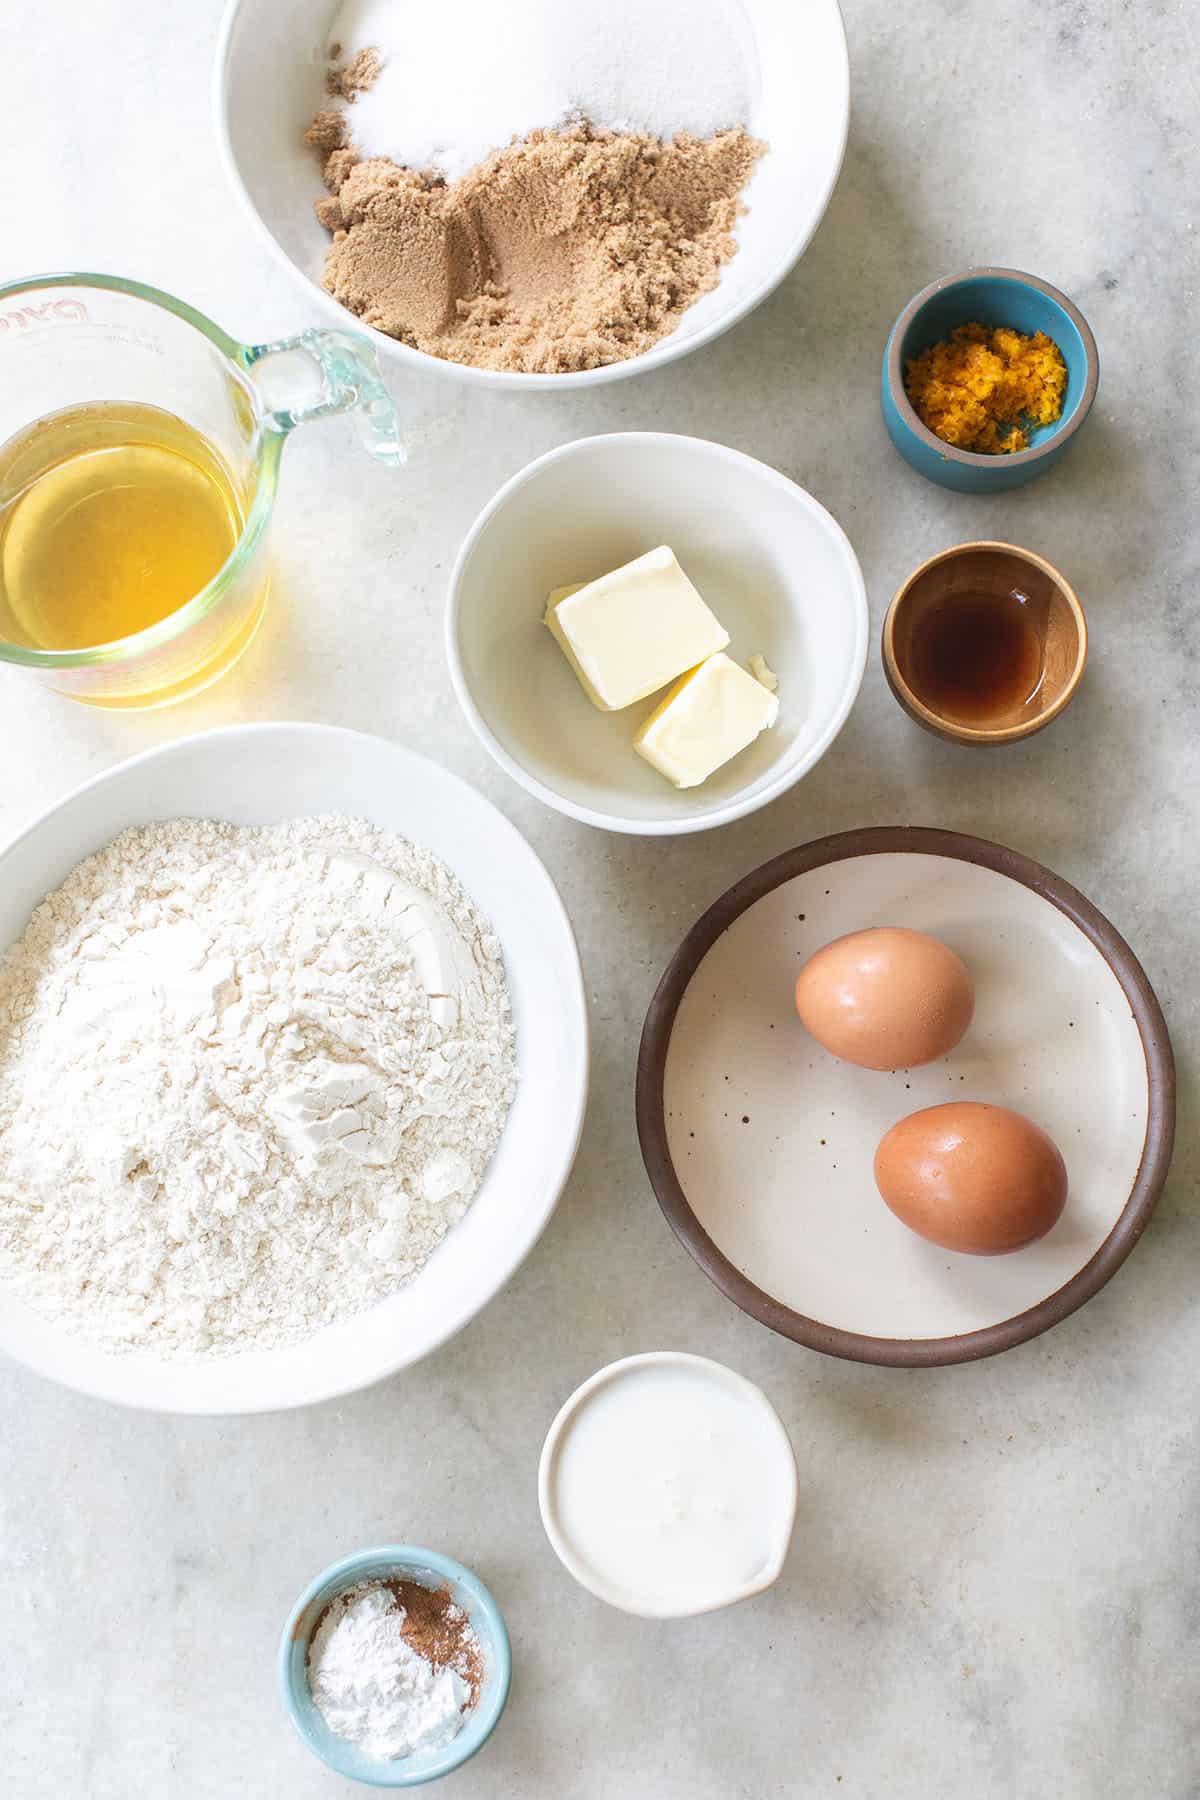 Flour, butter, eggs, buttermilk and vanilla in bowls to make donuts.